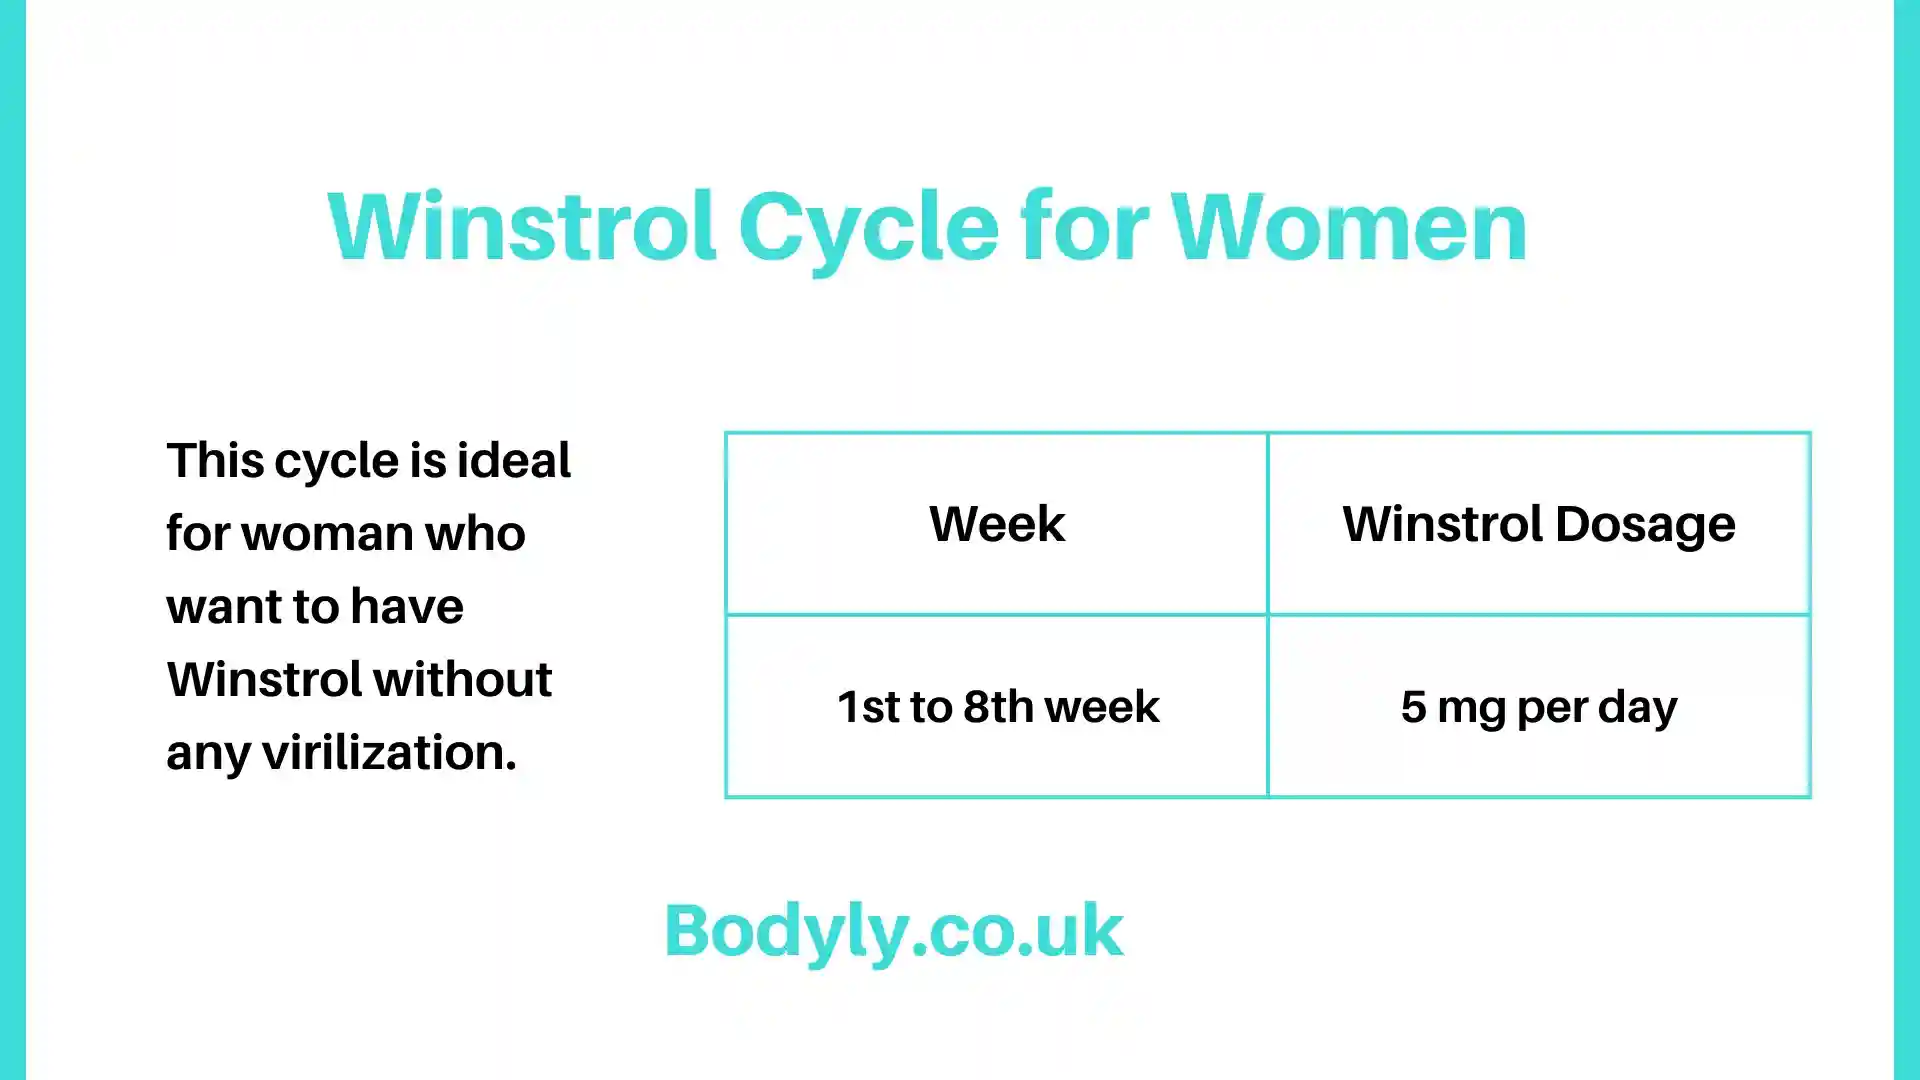 Winstrol cycle for women